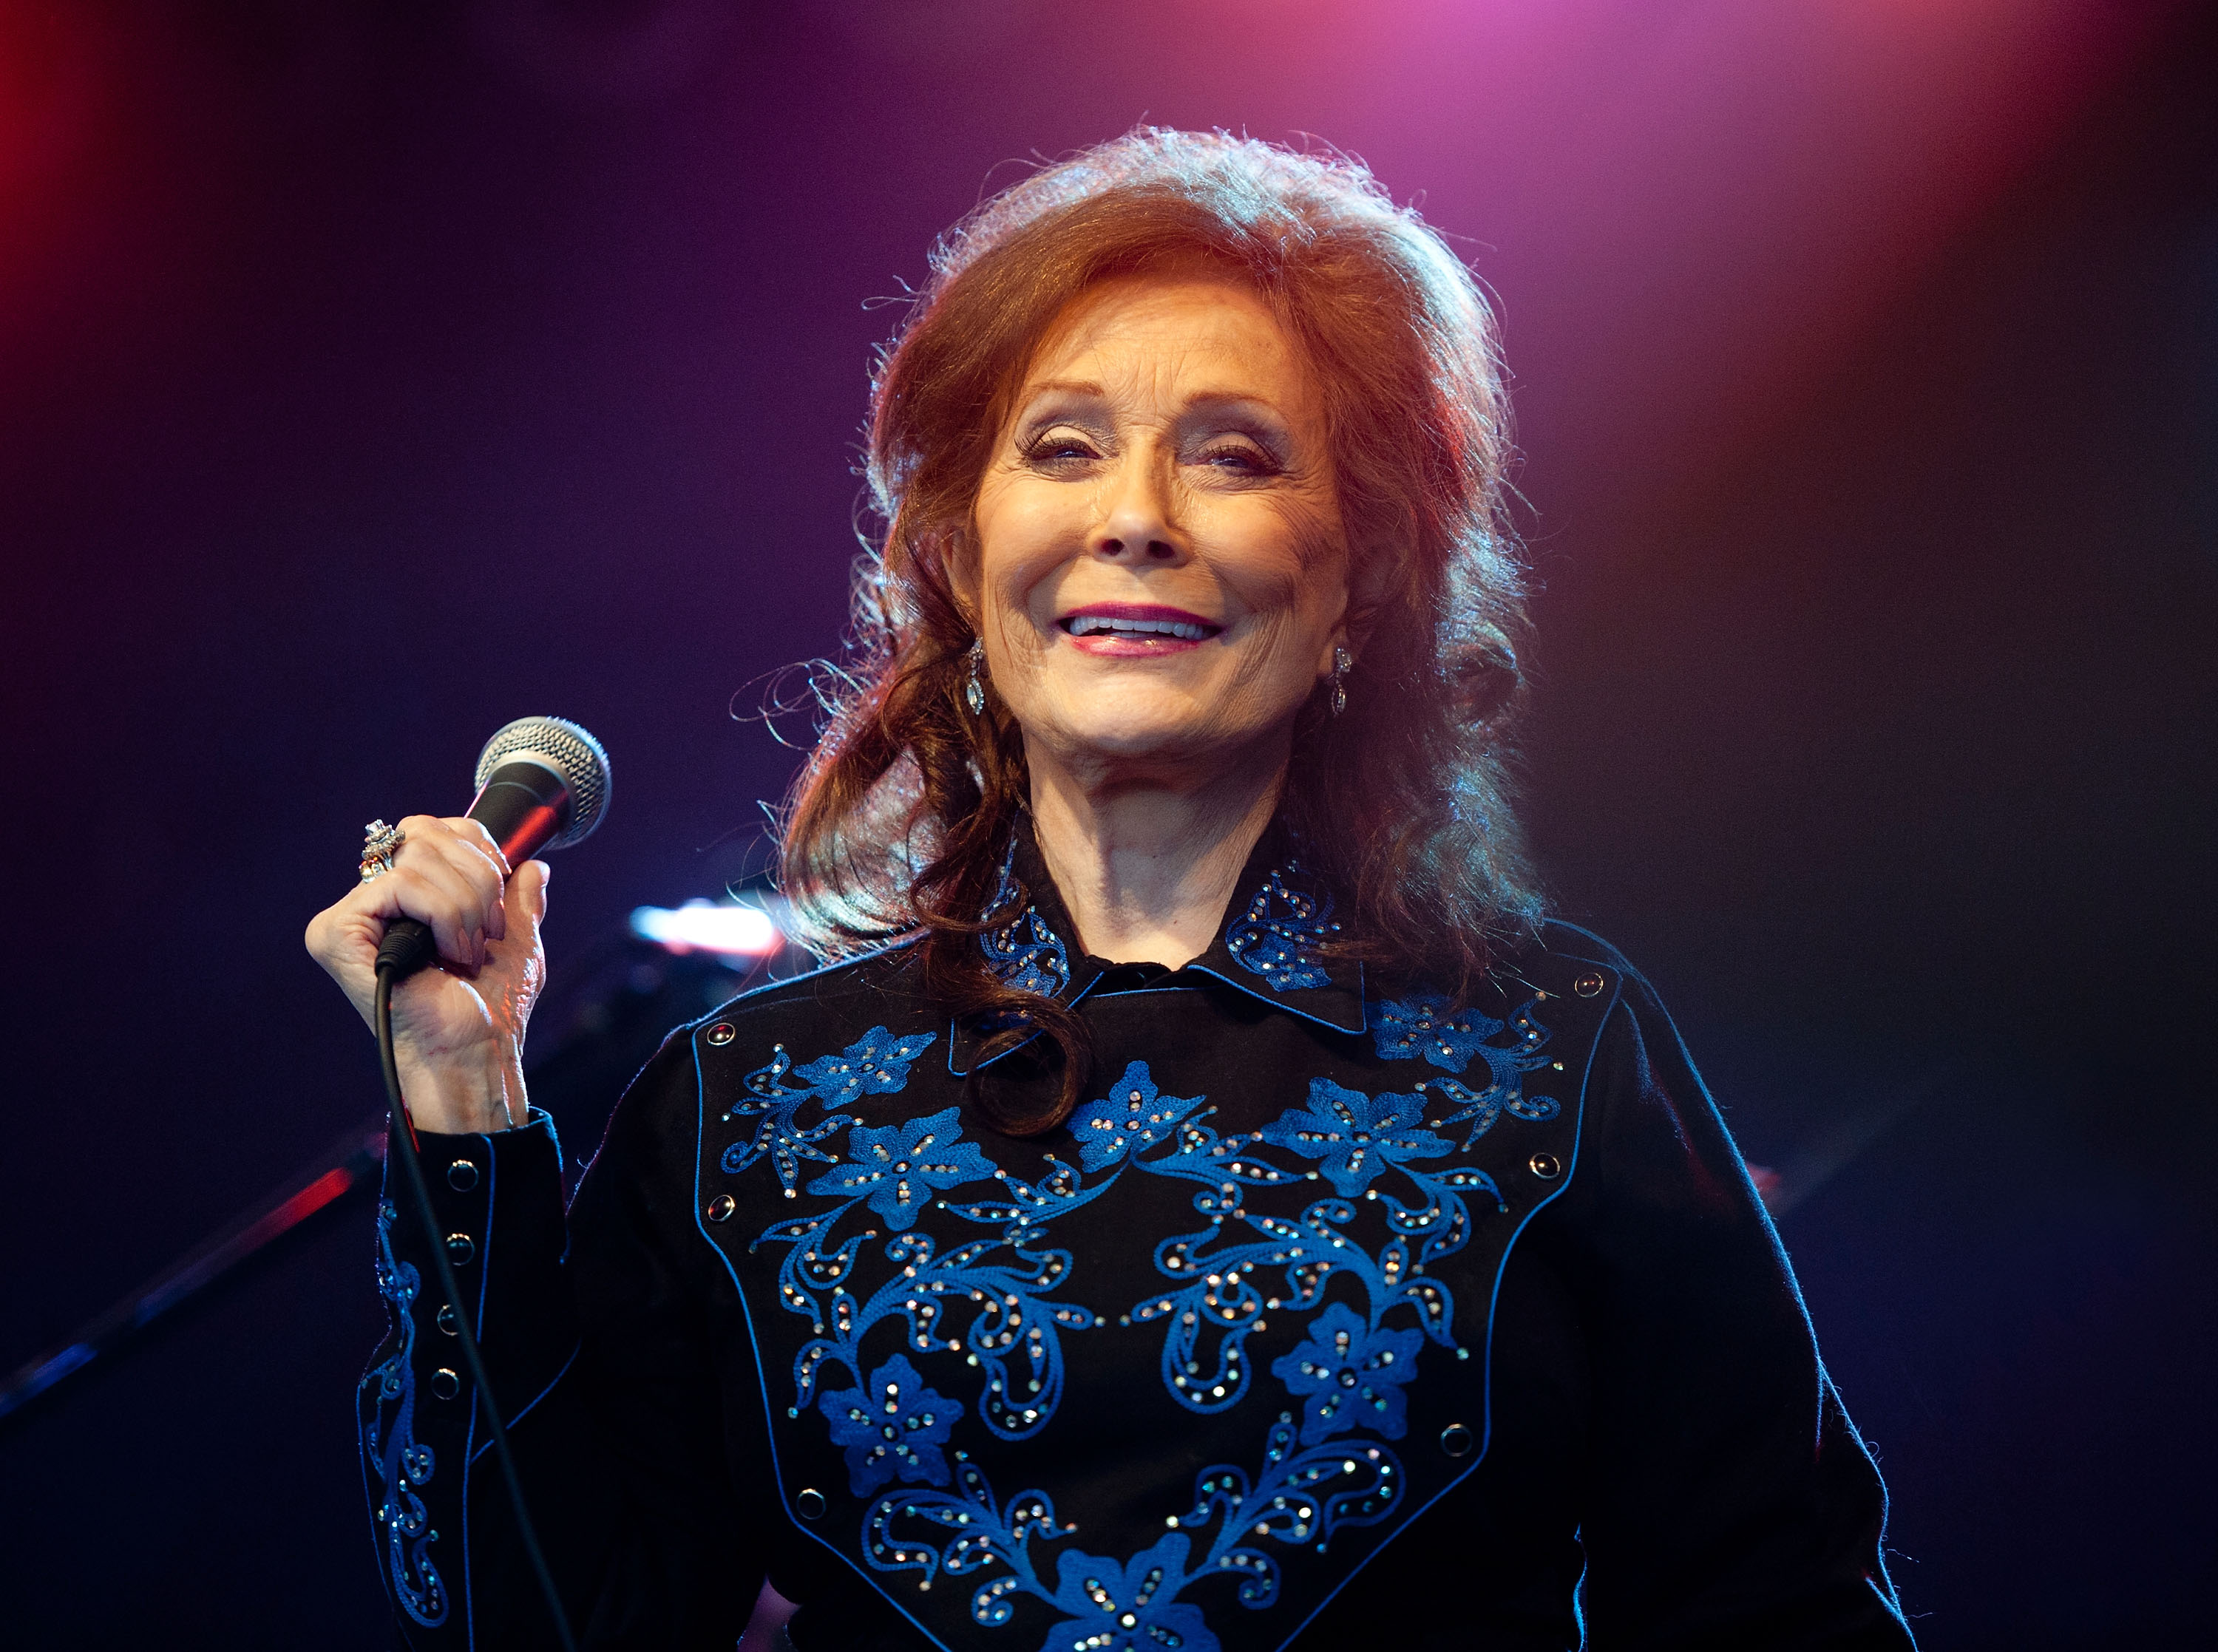 Loretta Lynn performs during the Bonnaroo Music and Arts Festival in Manchester, Tennessee, on June 11, 2011. | Source: Getty Images